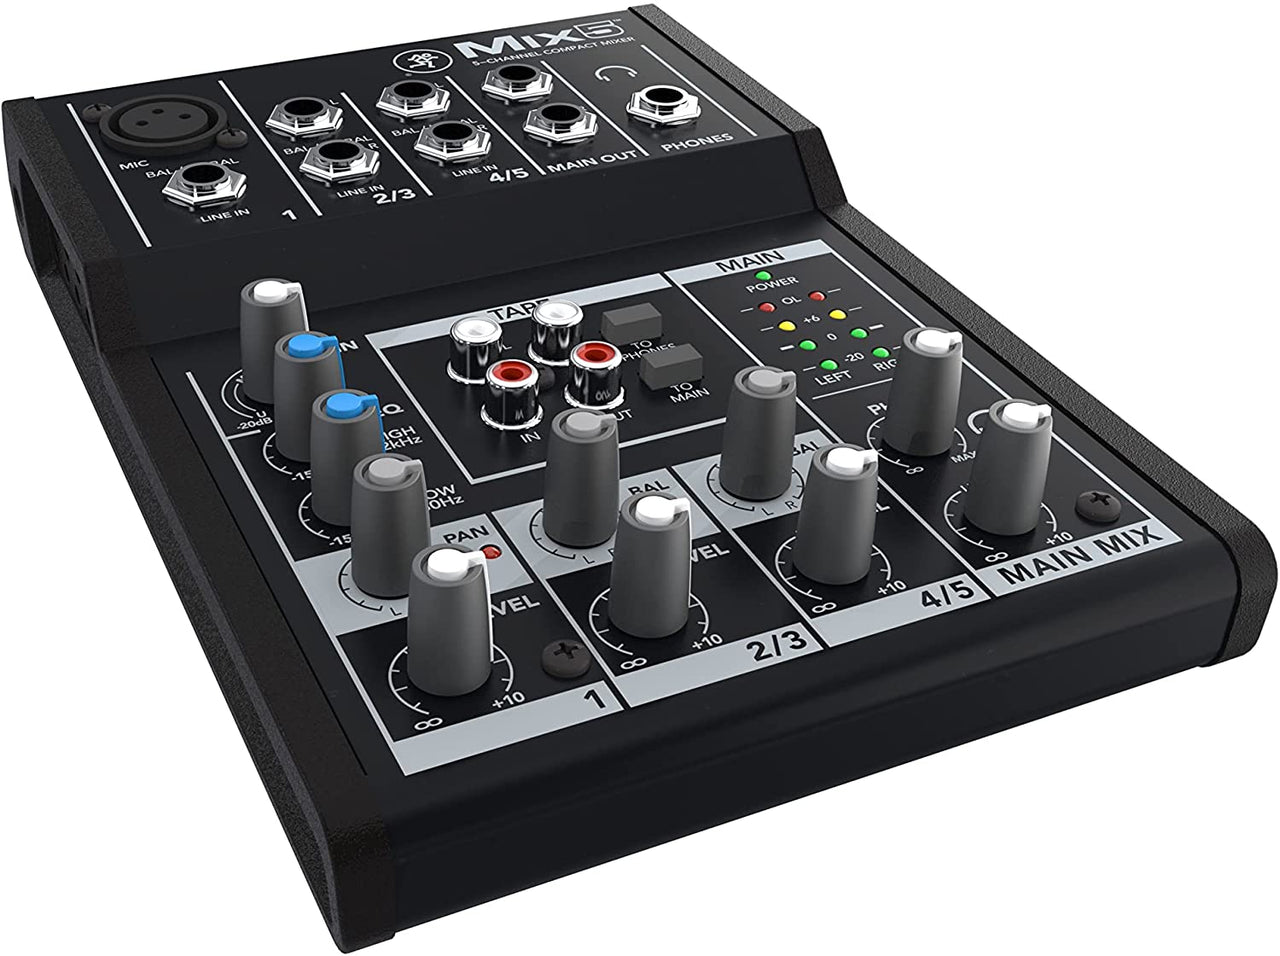 Mackie Mix5 Mix Series, 5-Channel Compact Mixer with Studio-Level Audio Quality